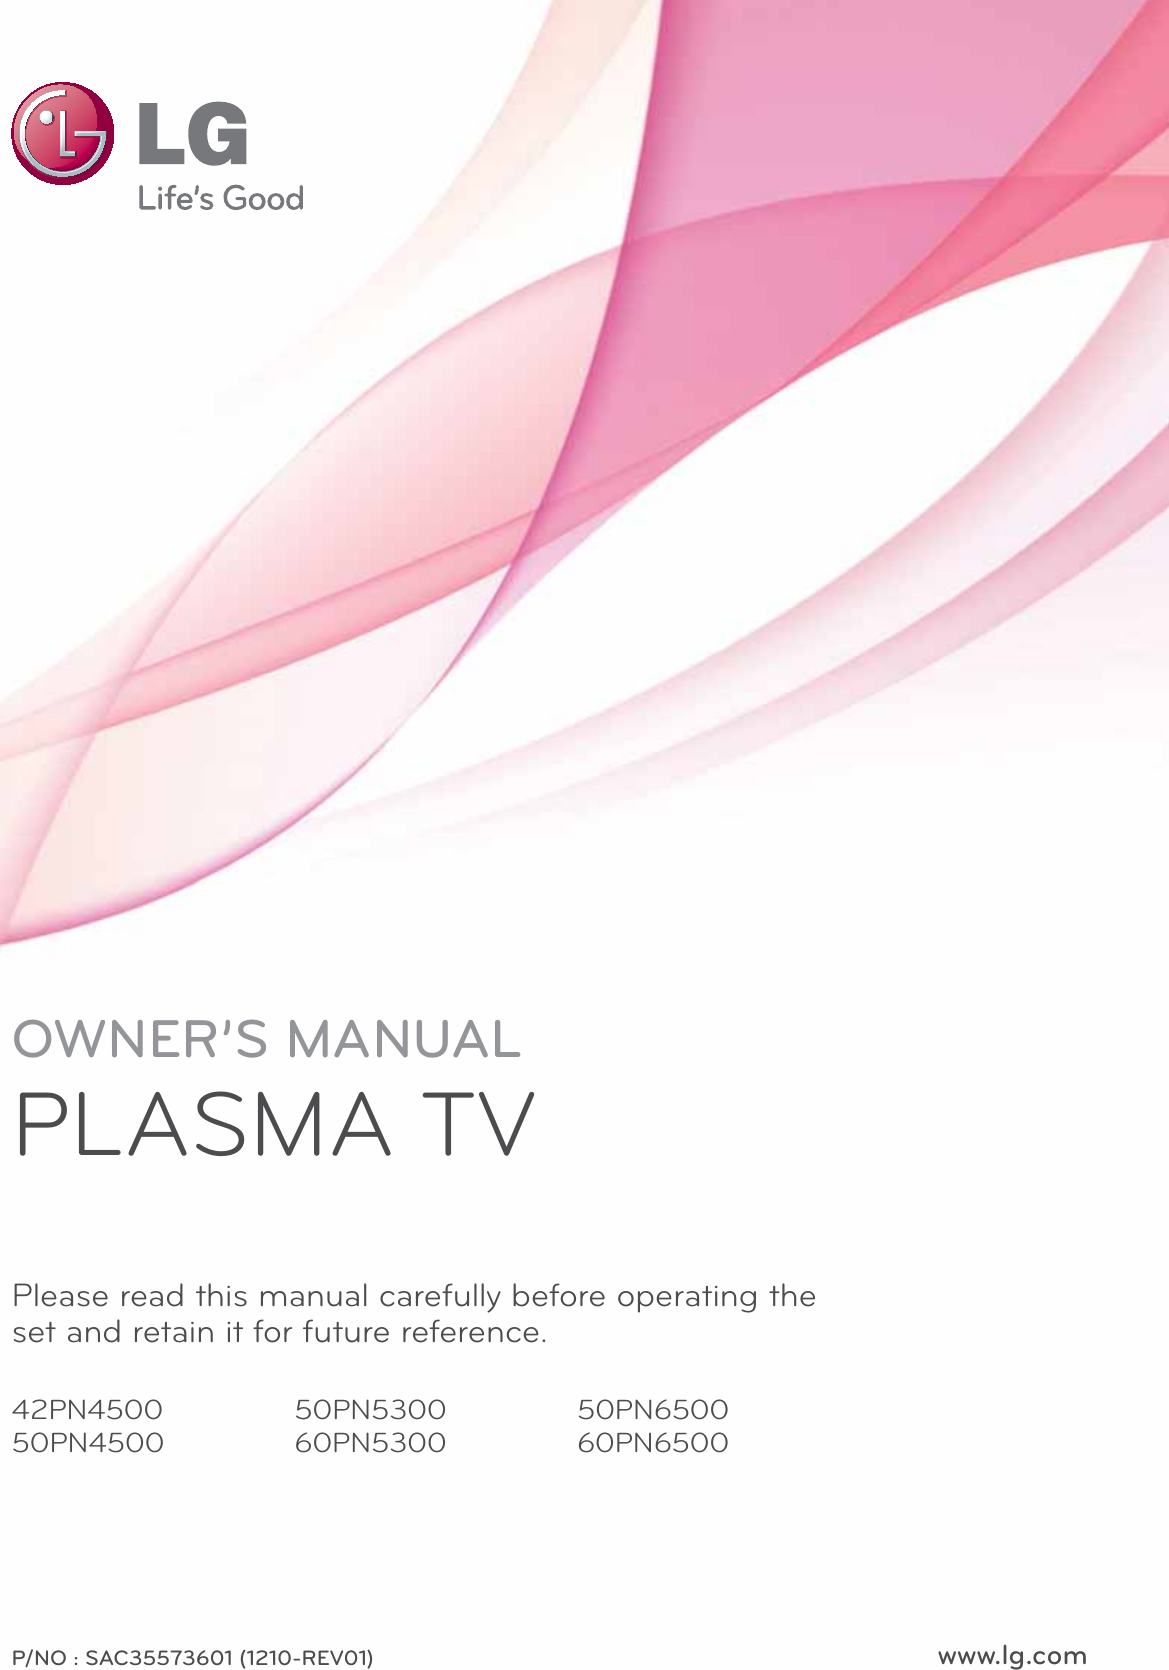 www.lg.comOWNER’S MANUALPLASMA TVPlease read this manual carefully before operating the set and retain it for future reference.42PN450050PN450050PN530060PN530050PN650060PN6500P/NO : SAC35573601 (1210-REV01)